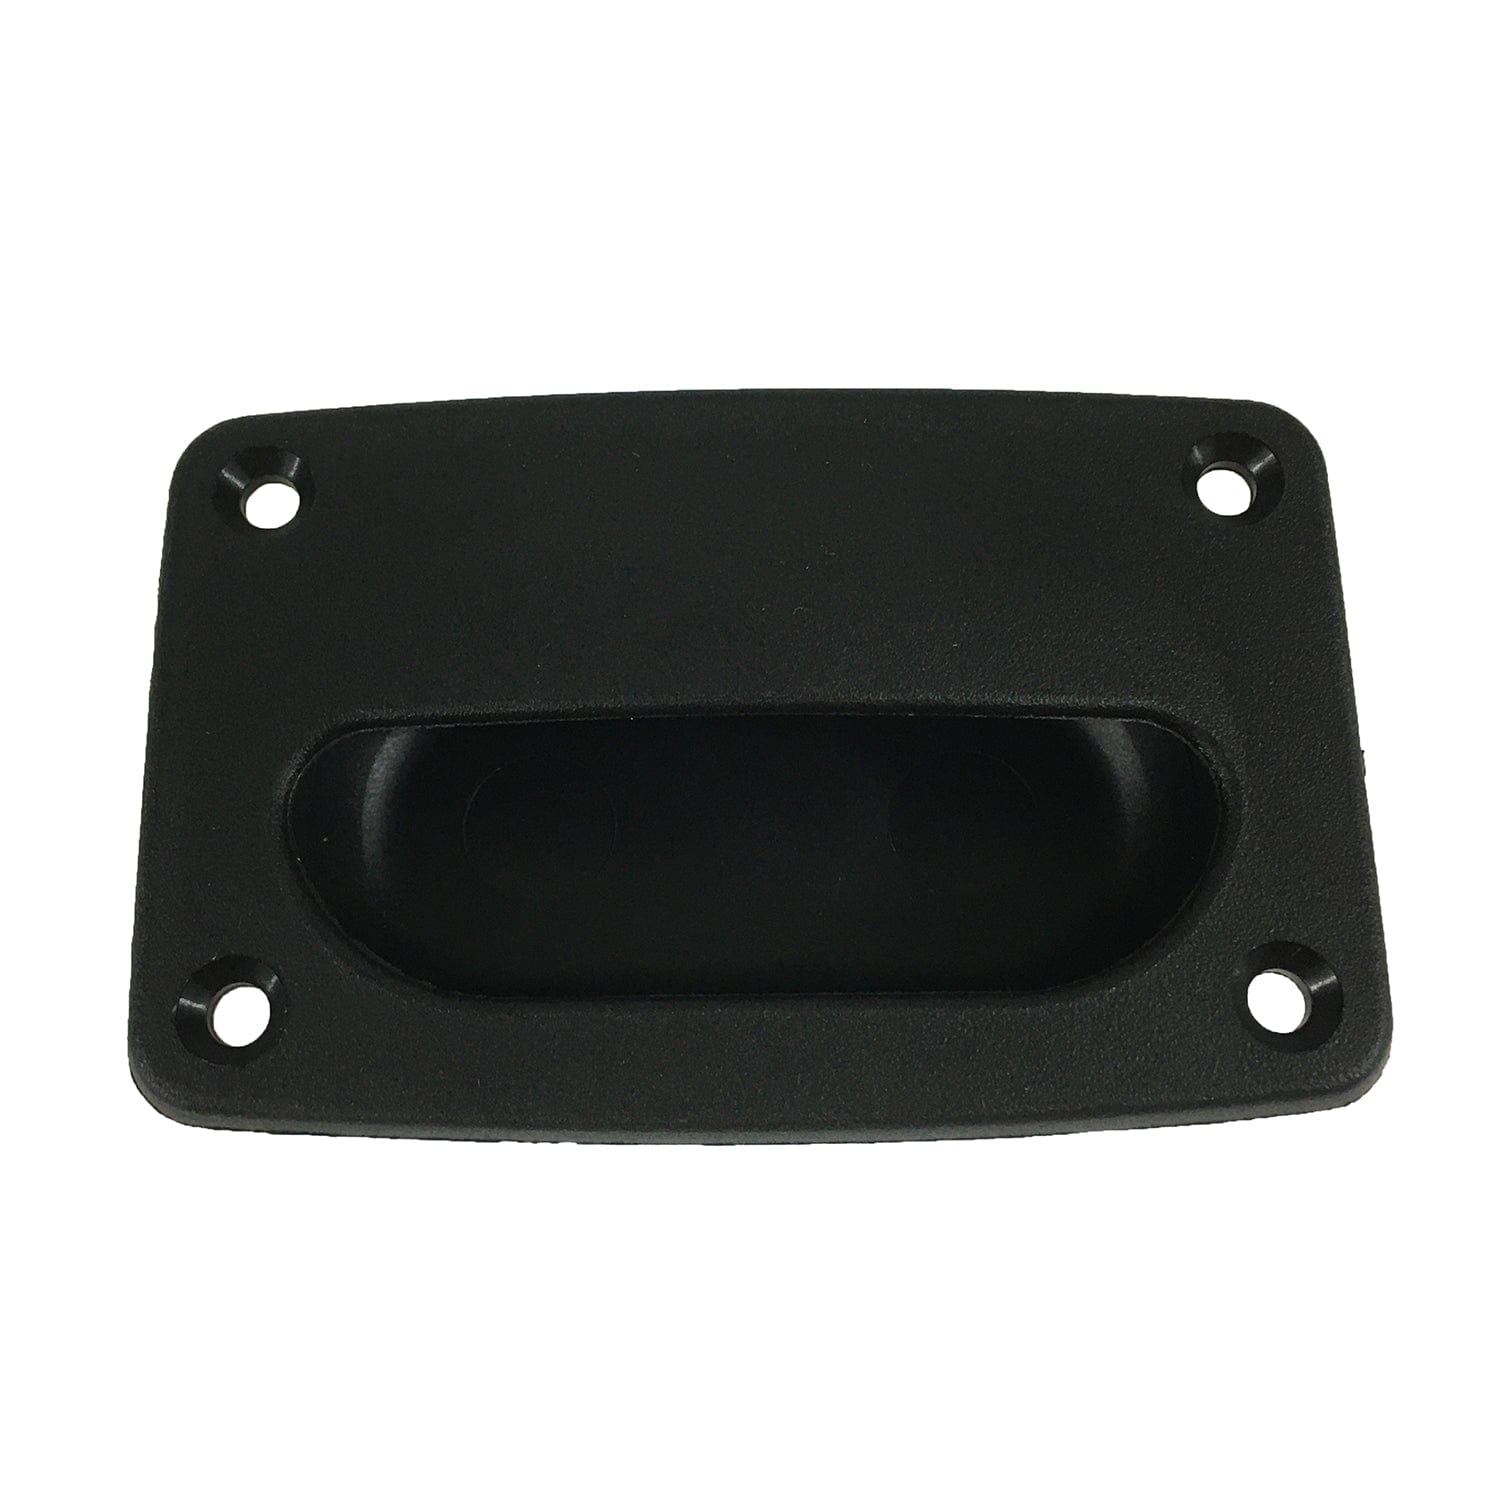 Attwood Corporation 2027-1 ABS Flush Hatch Pull